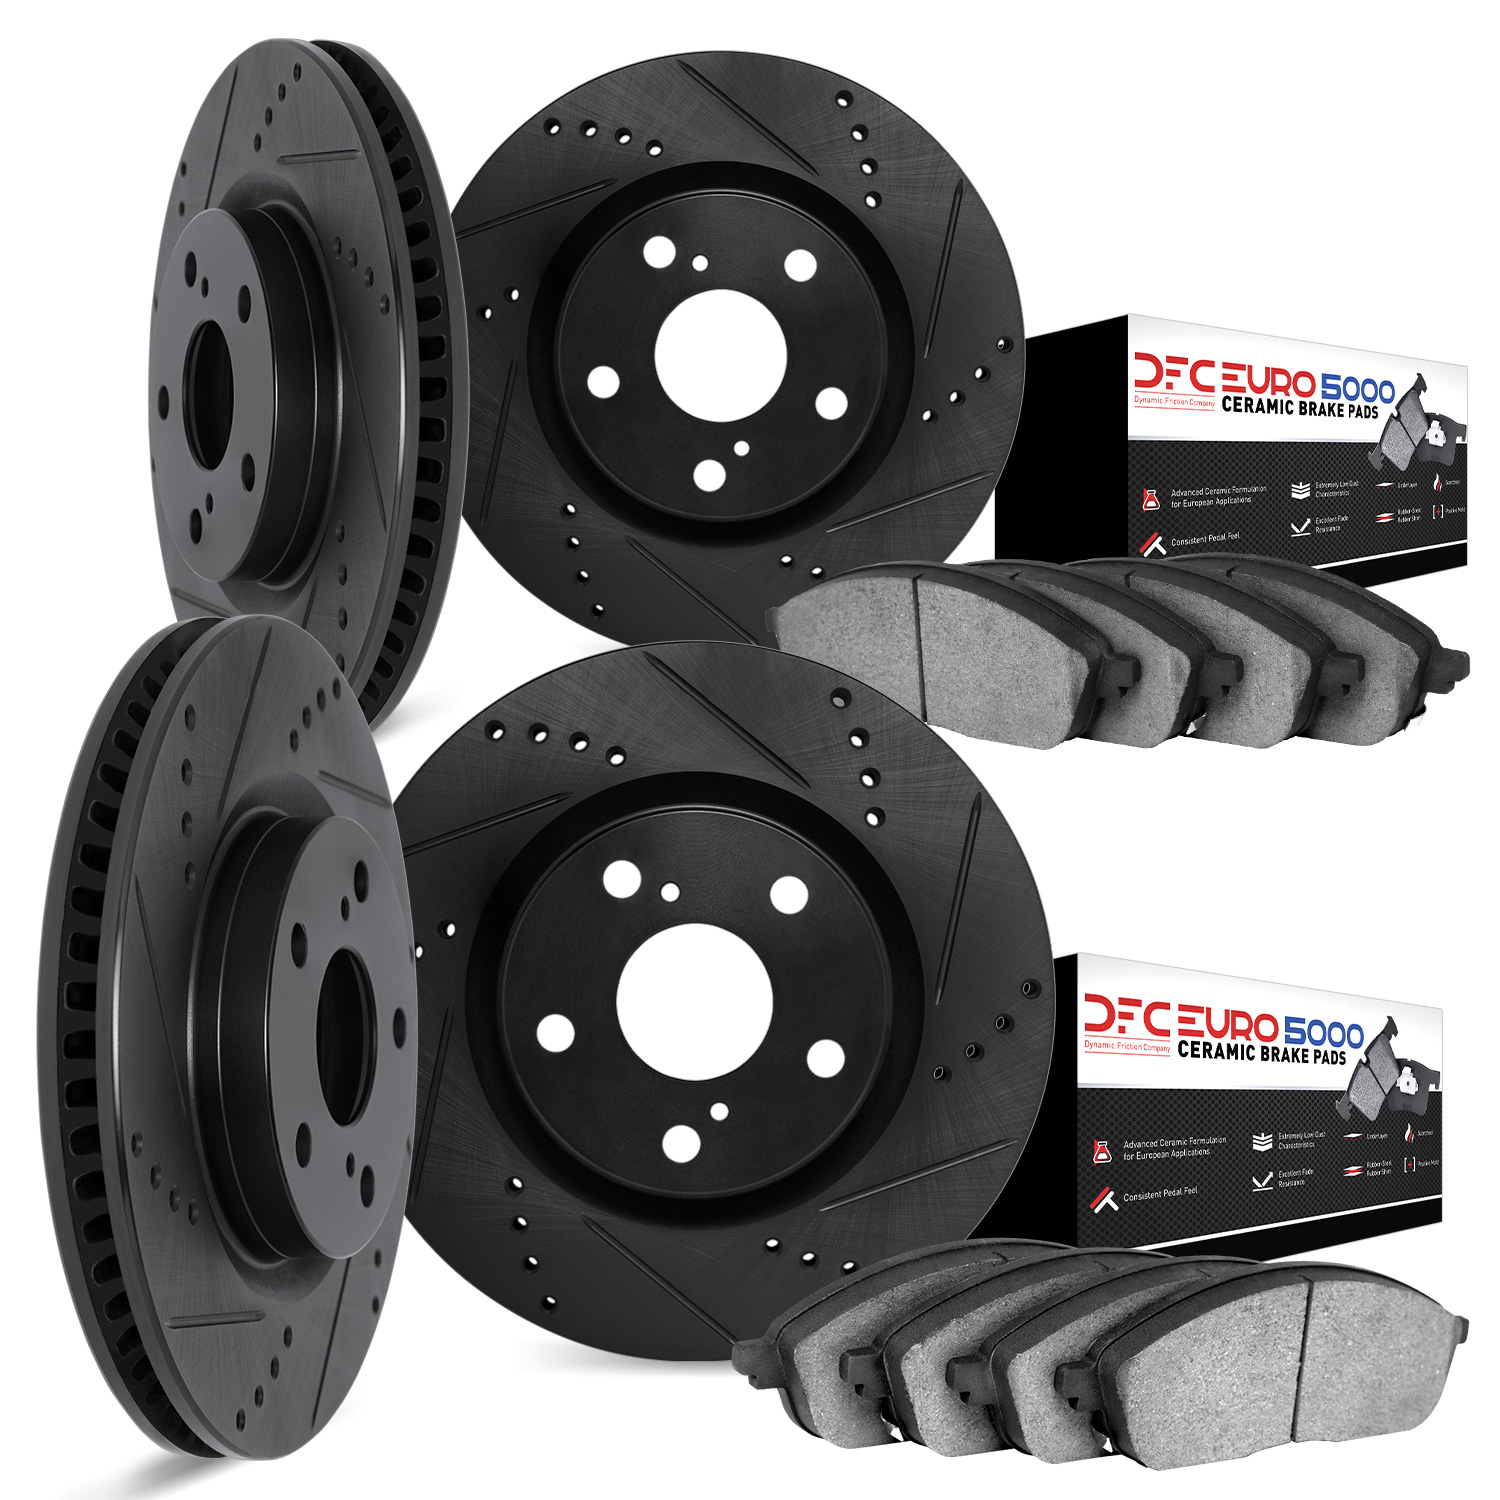 8604-31007 Drilled/Slotted Brake Rotors w/5000 Euro Ceramic Brake Pads Kit [Black], 1994-1995 BMW, Position: Front and Rear